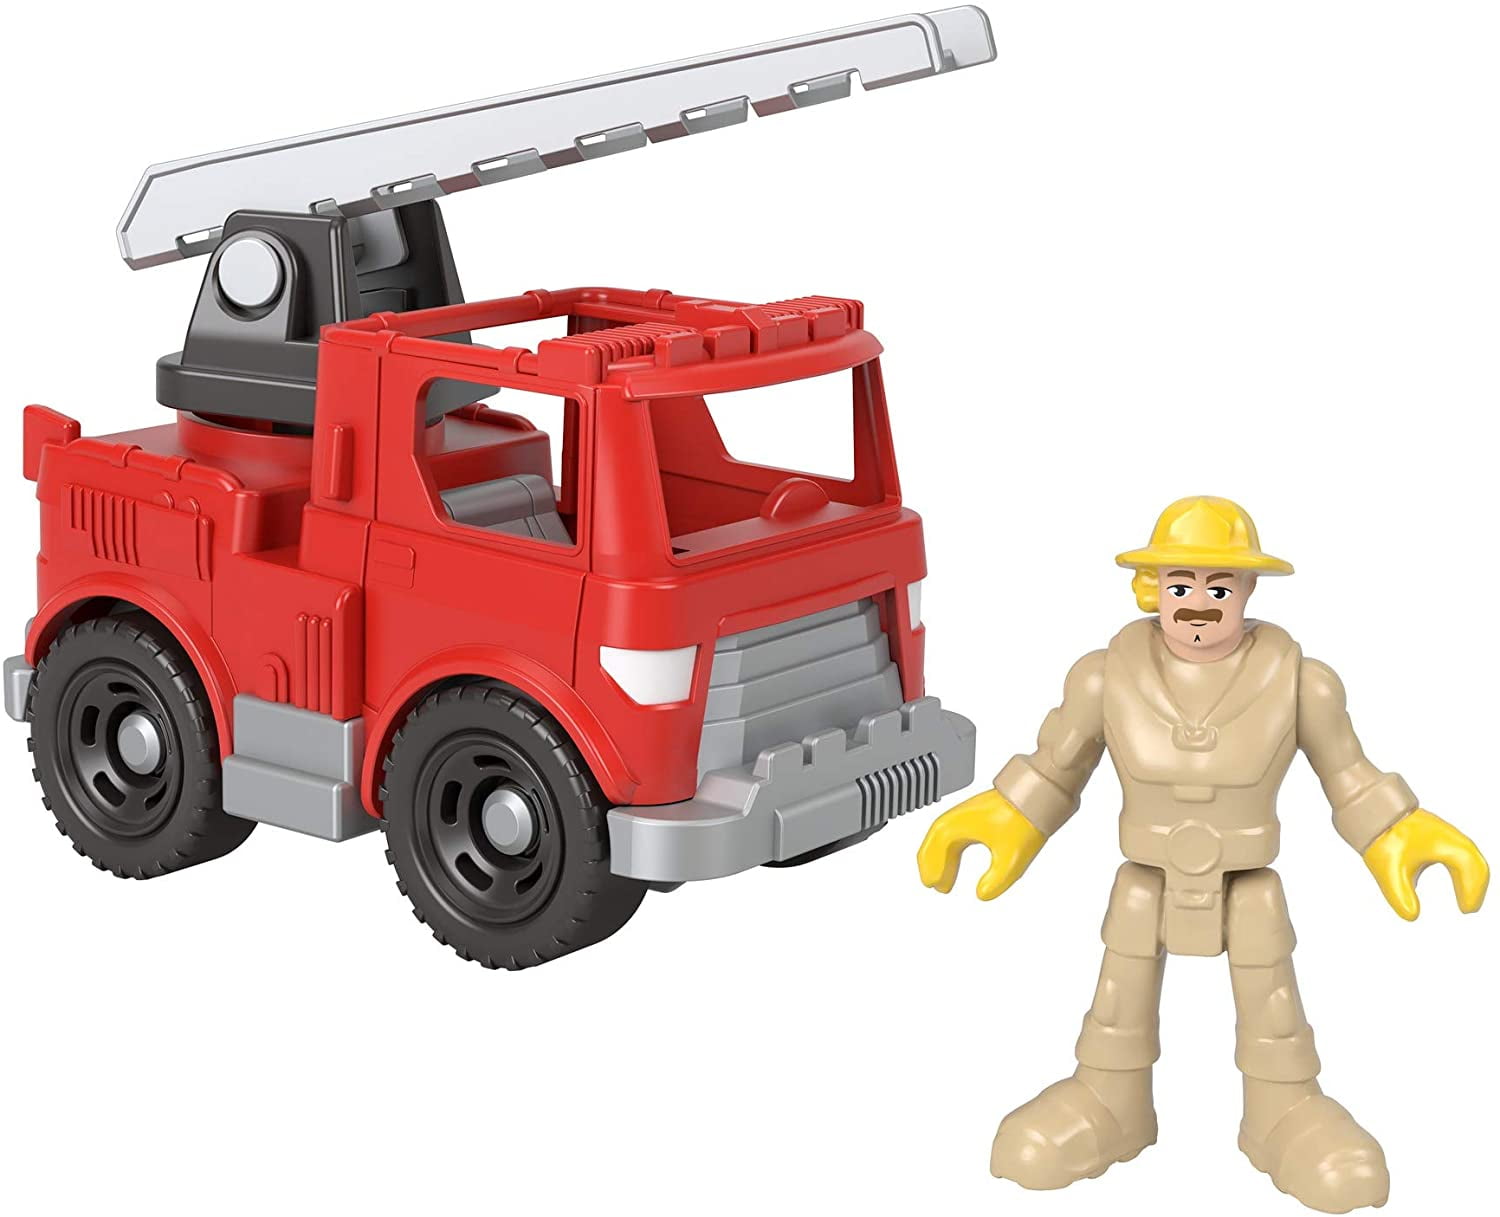 Fire Truck Firetruck w/ Figure Details about   Fisher Price Imaginext Vehicle NEW Red 